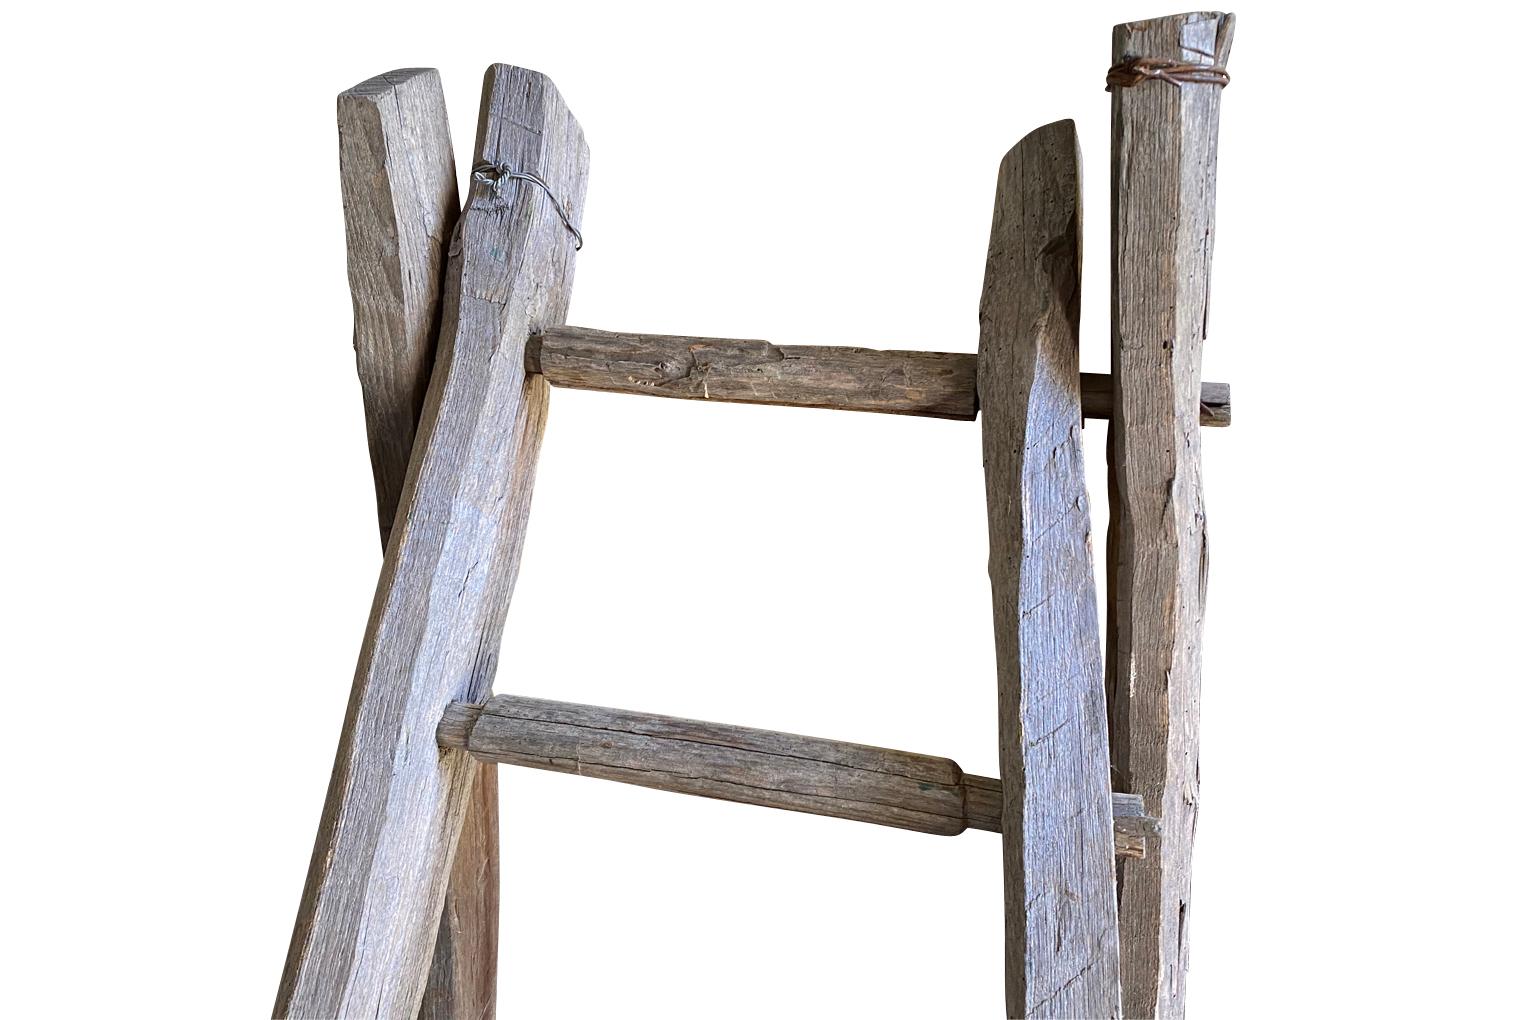 French 19th Century Orchard Ladder In Good Condition For Sale In Atlanta, GA